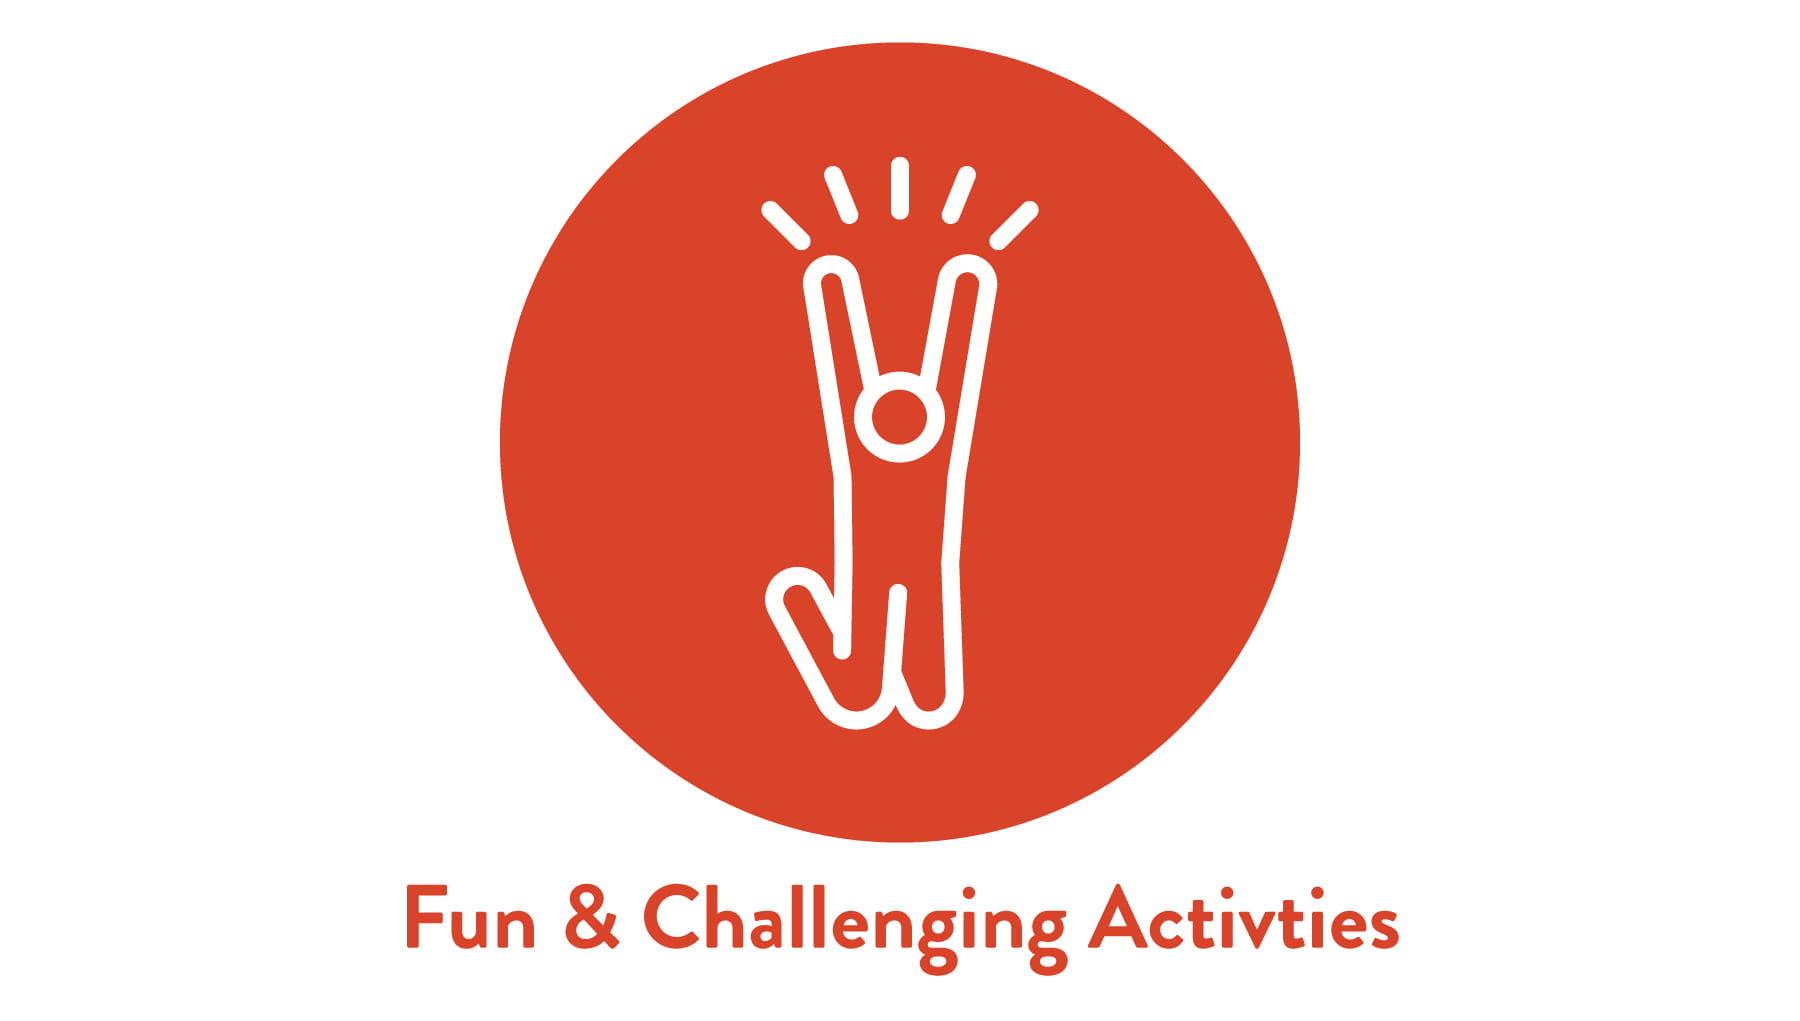 Fun & Challenging Attractions